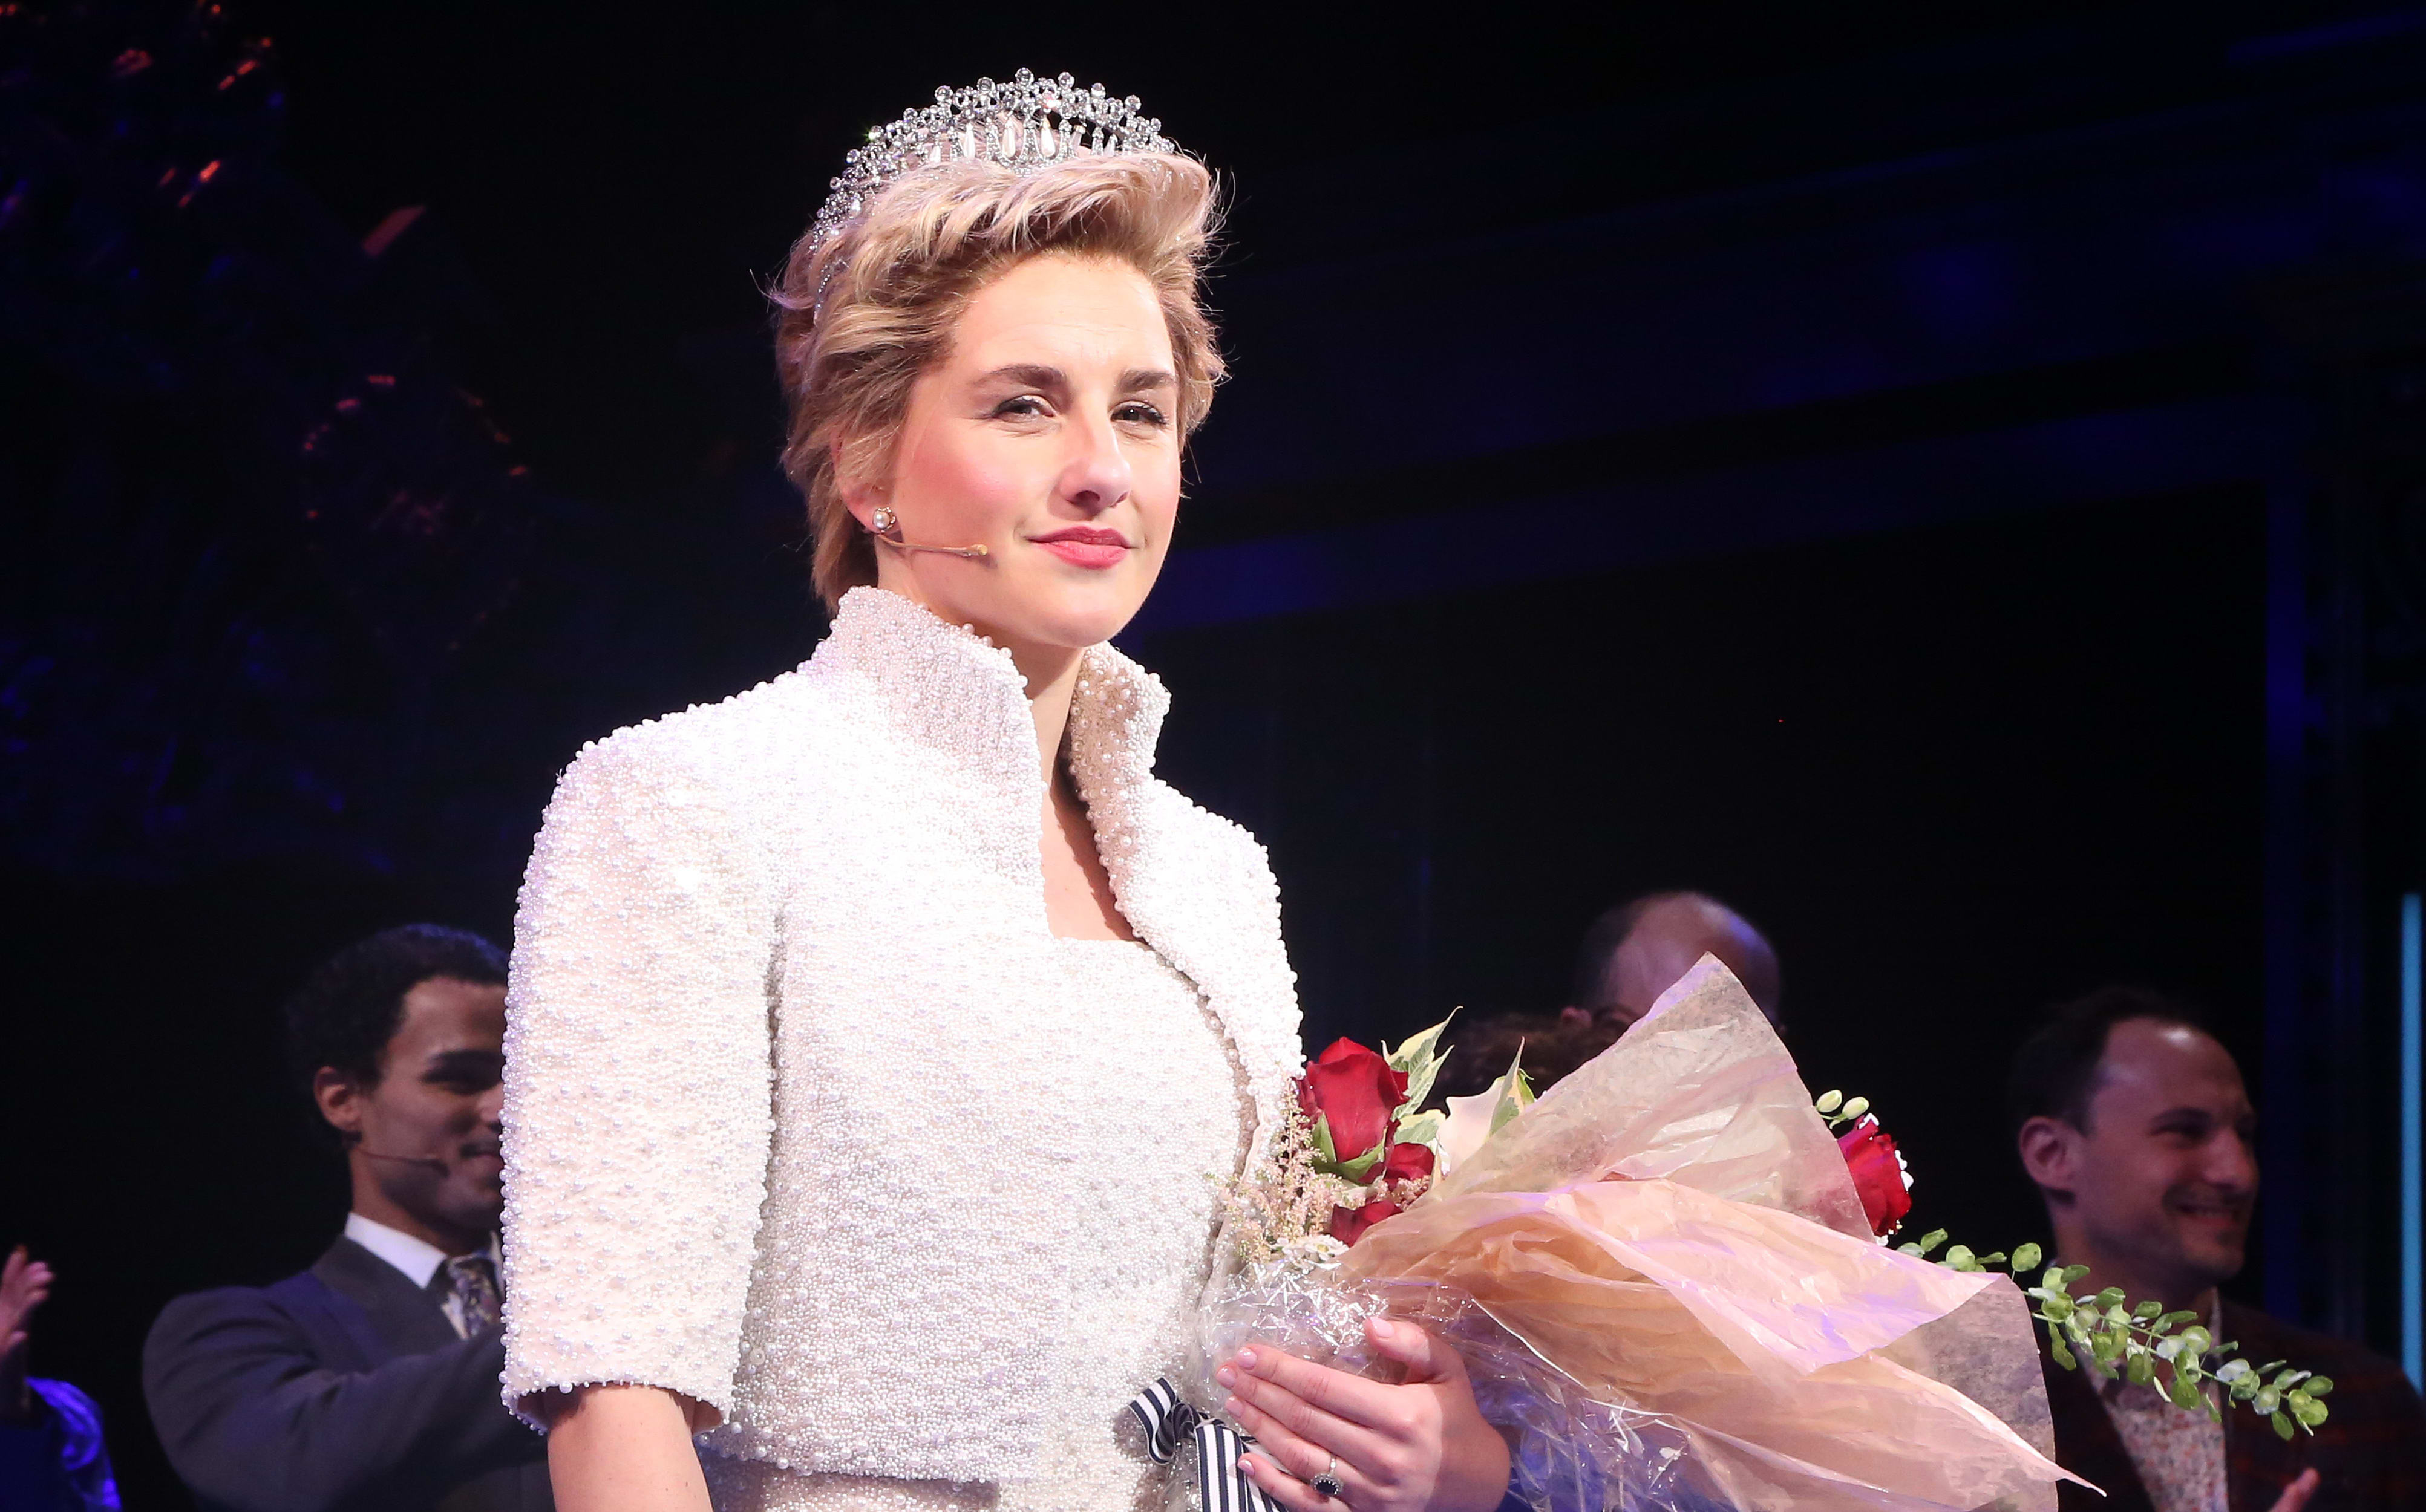 Jeanna de Waal as "Princess Diana" during the first preview performance curtain call of "Diana: The Musical" on Broadway at The Longacre Theatre on November 2, 2021 in New York City.